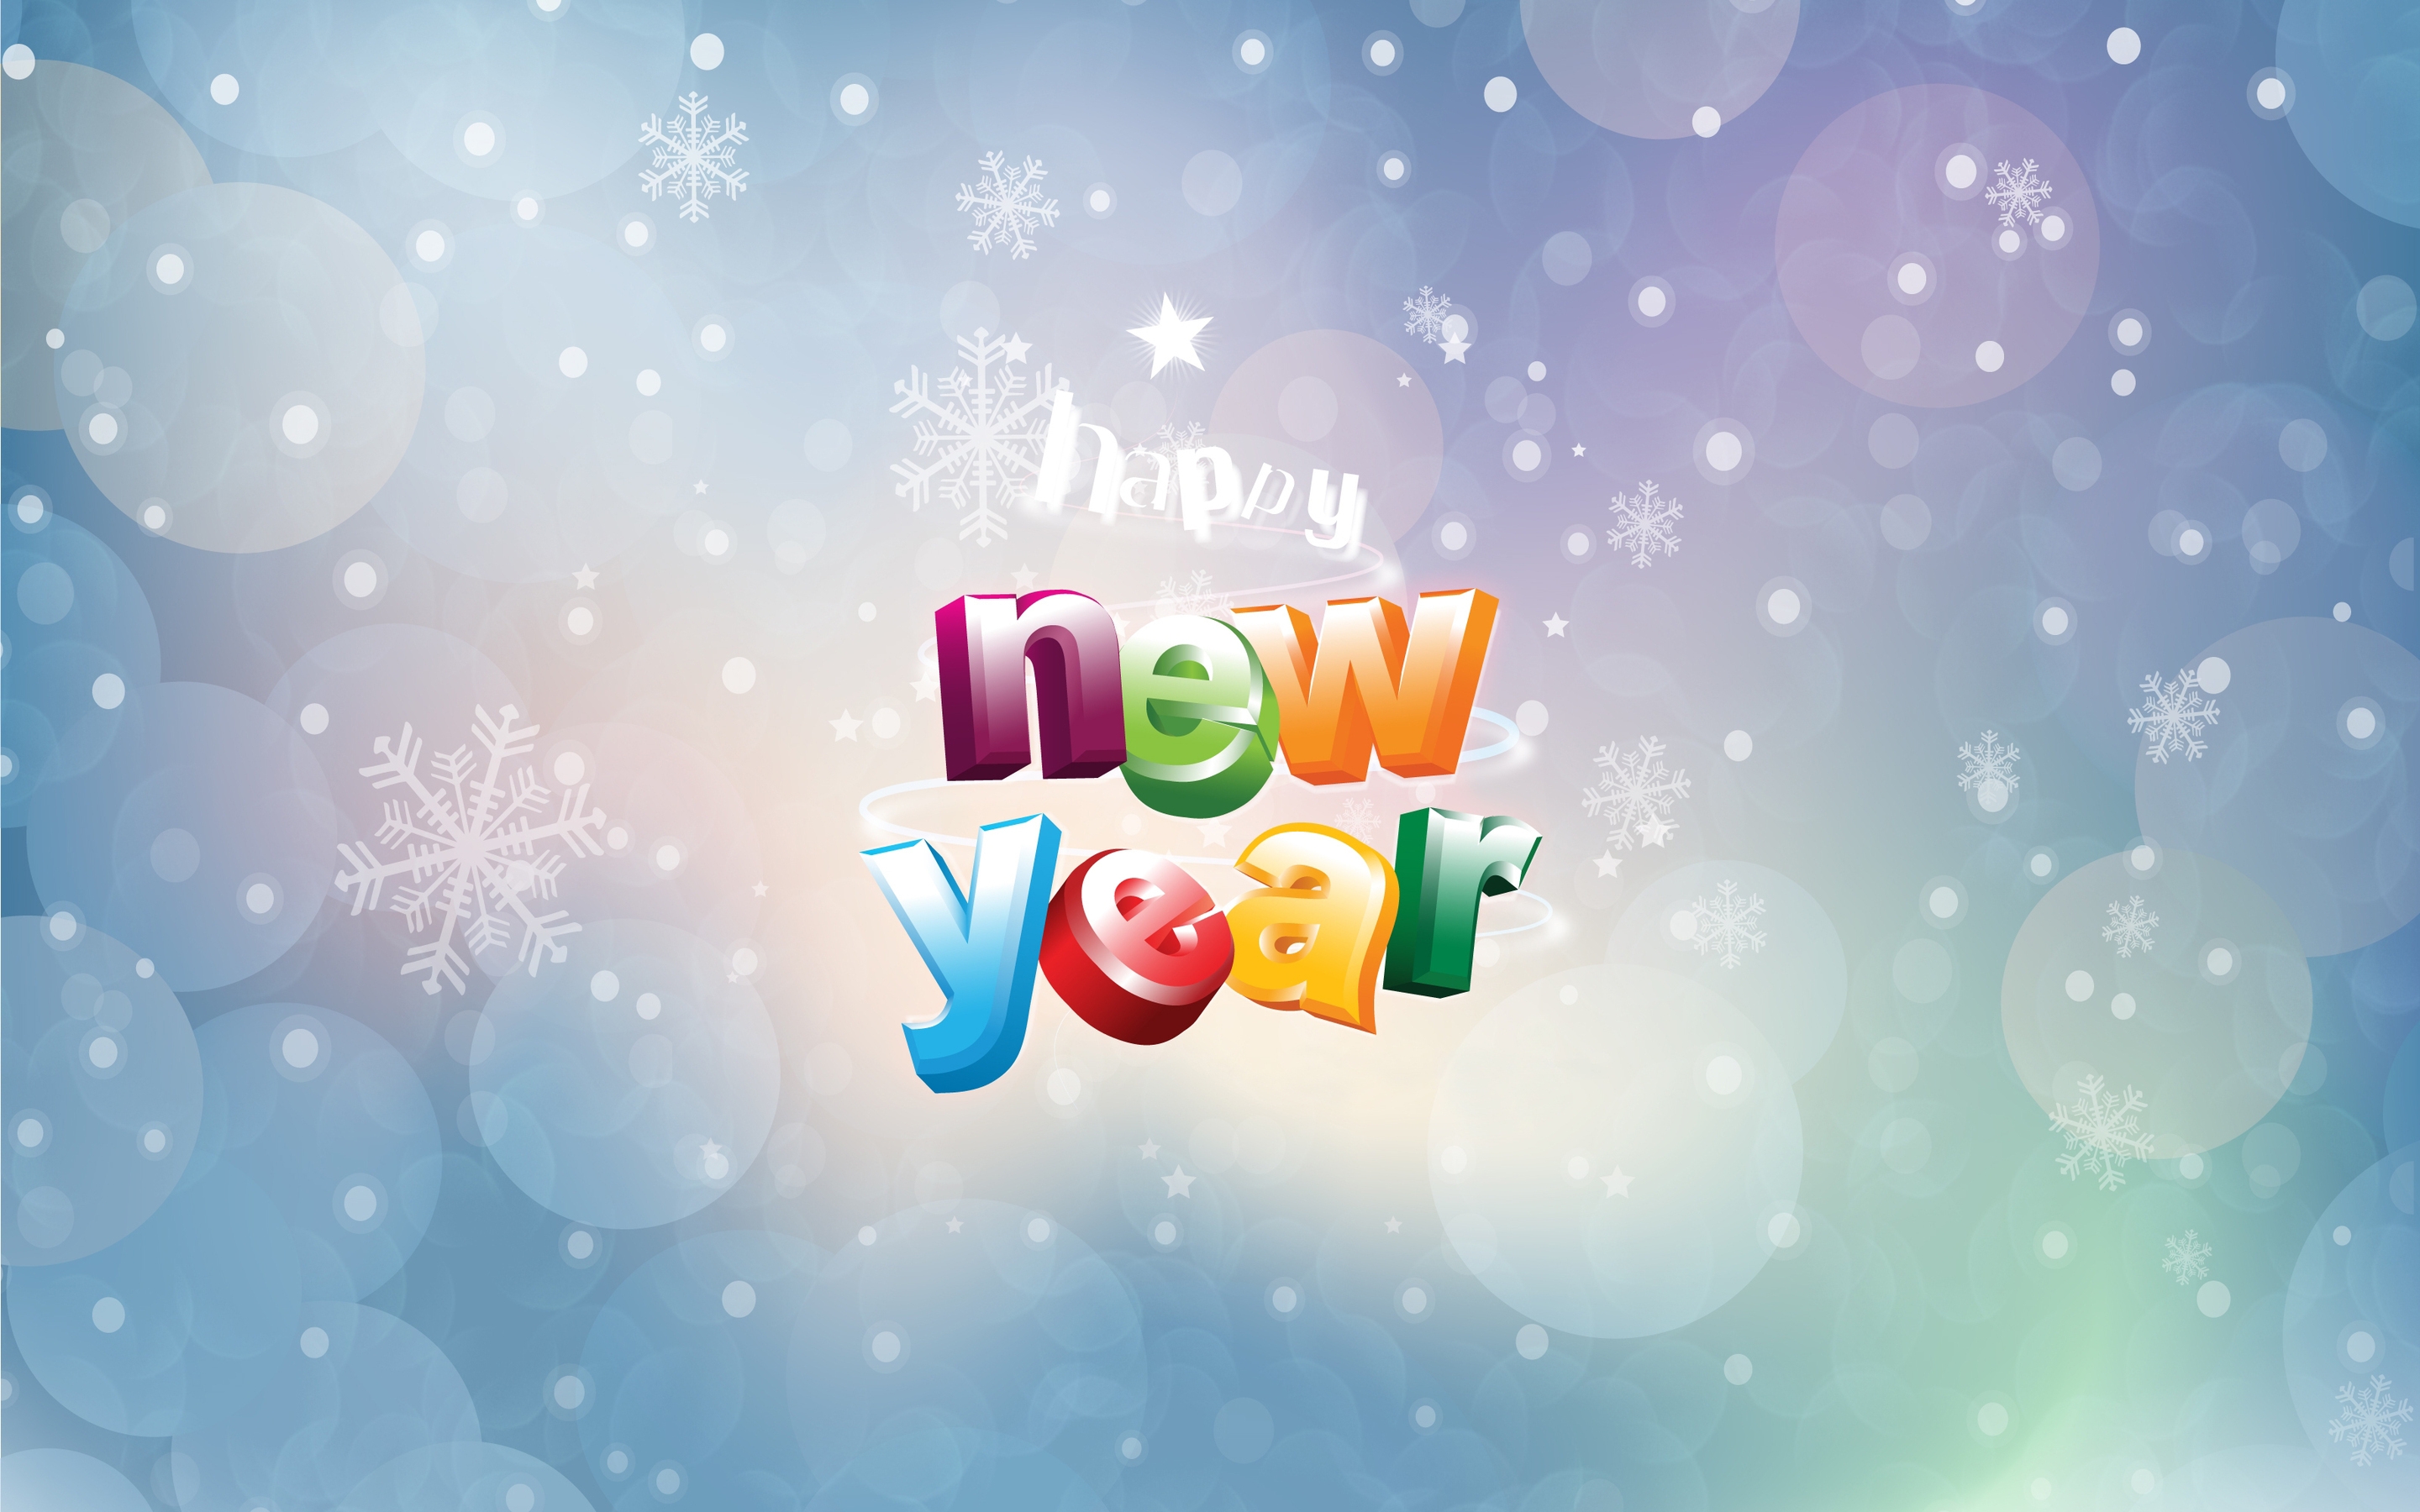 2013 Happy New Year Everyone for 2880 x 1800 Retina Display resolution